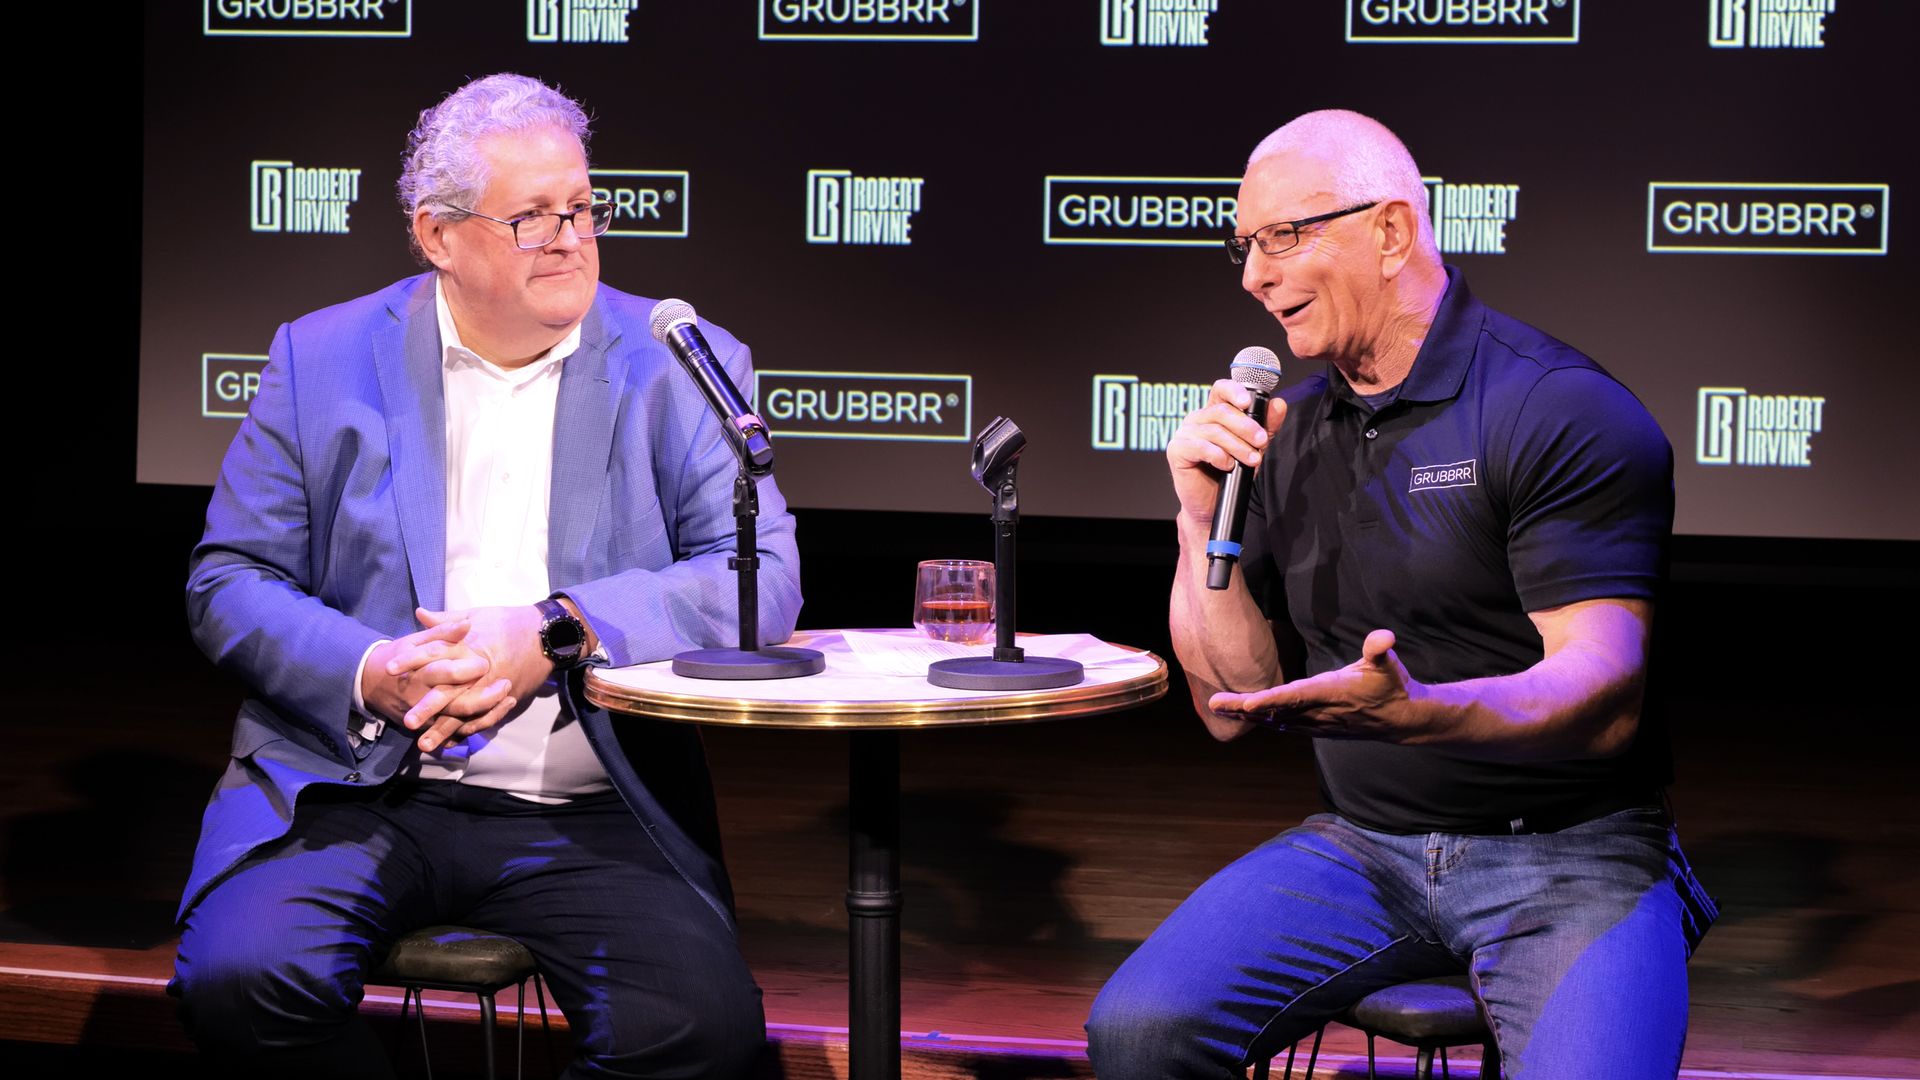 Grubbrr CEO Sam Zietz and Food Network chef Robert Irvine at an event in NYC.